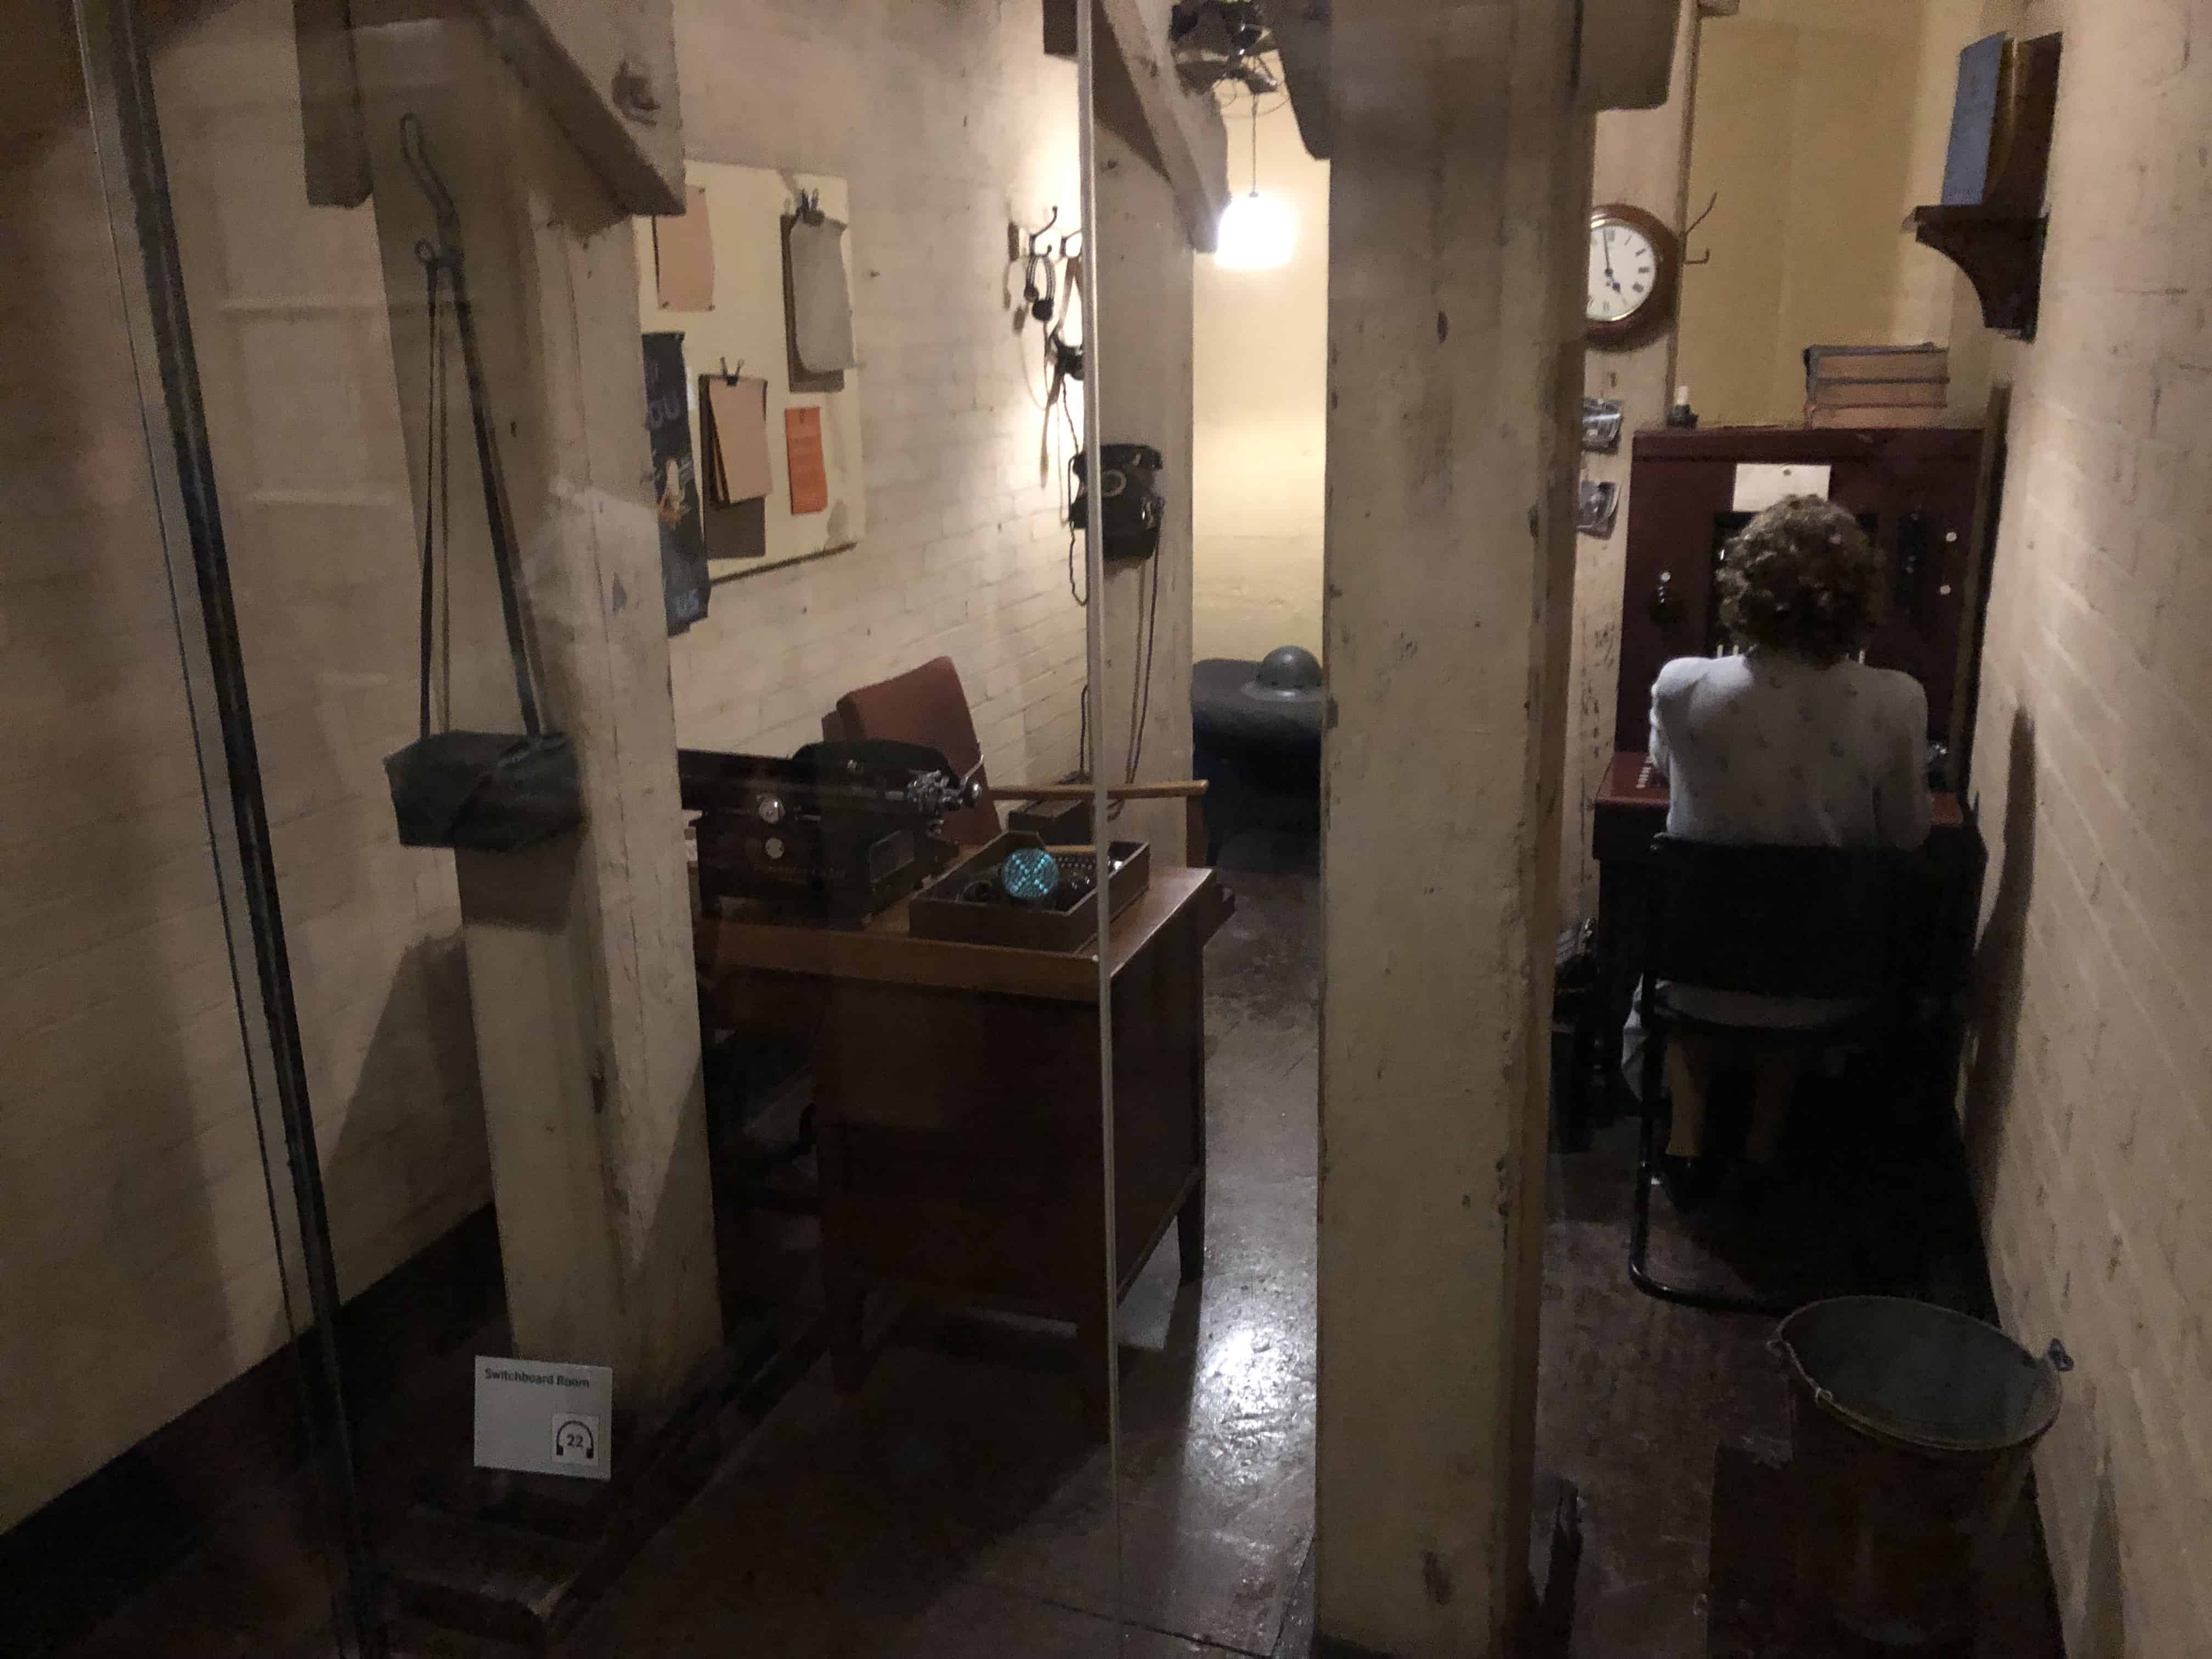 Switchboard Room at the Churchill War Rooms in London, England